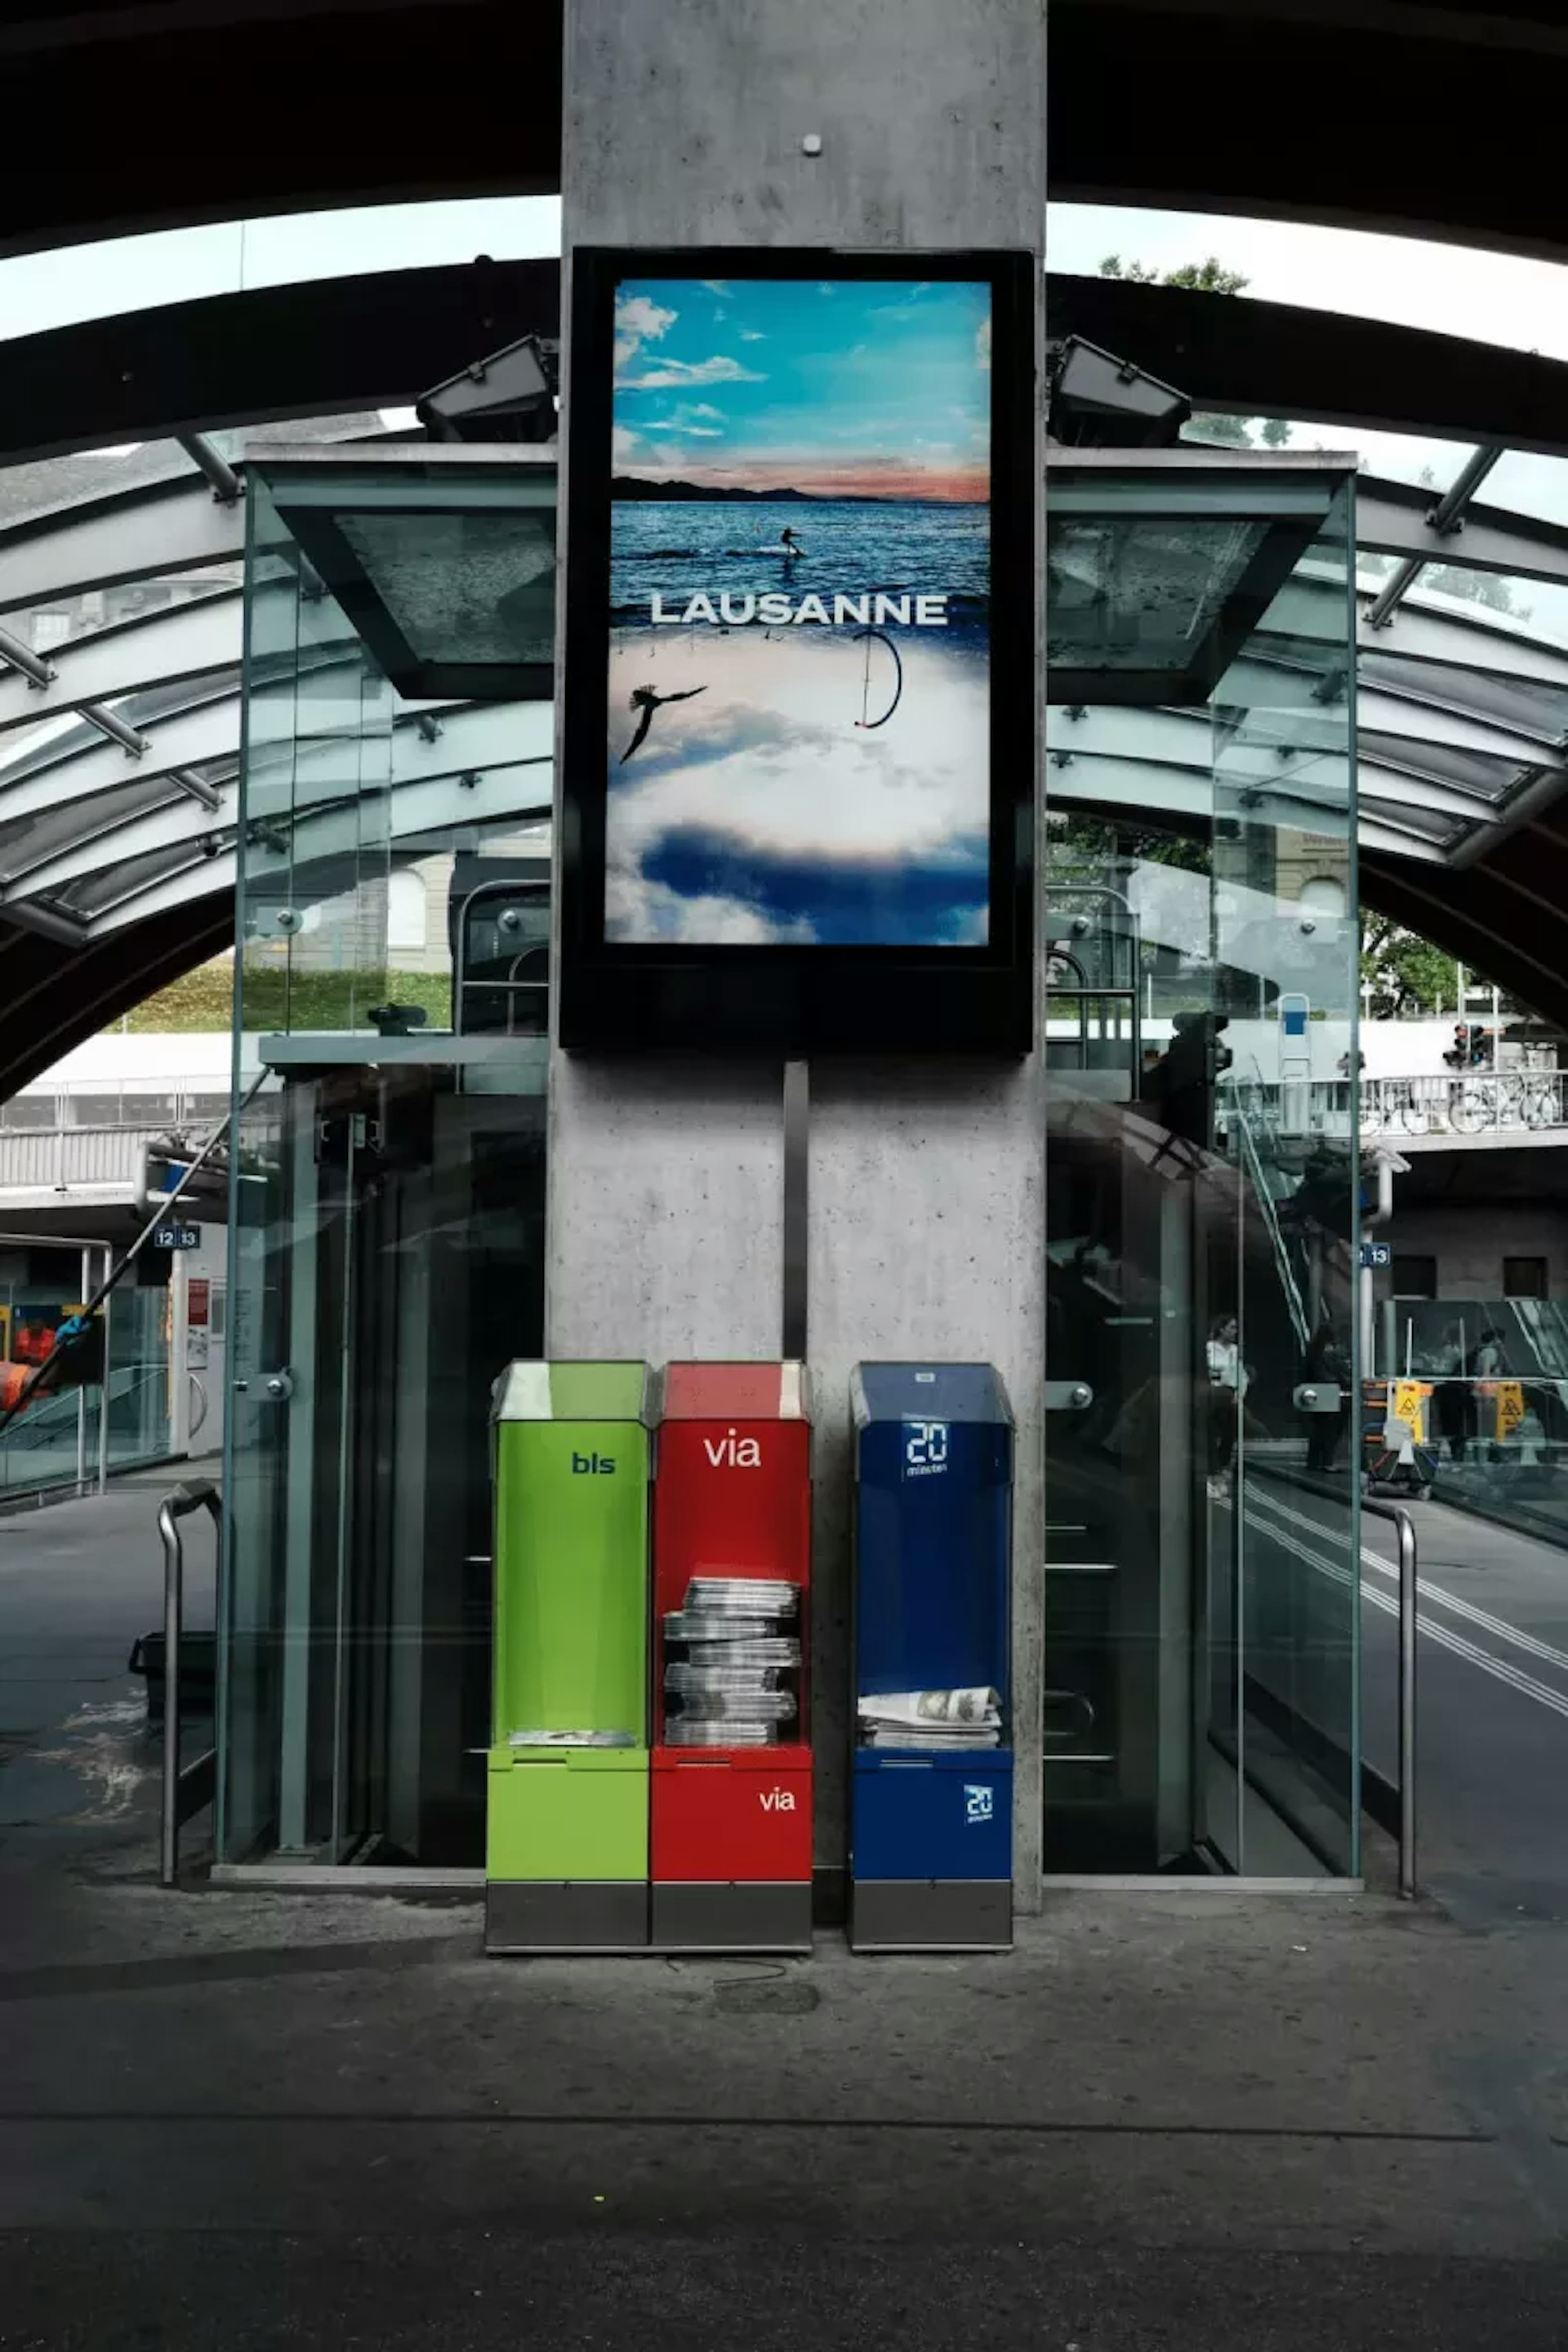 Tourist poster for Lausanne in a train station